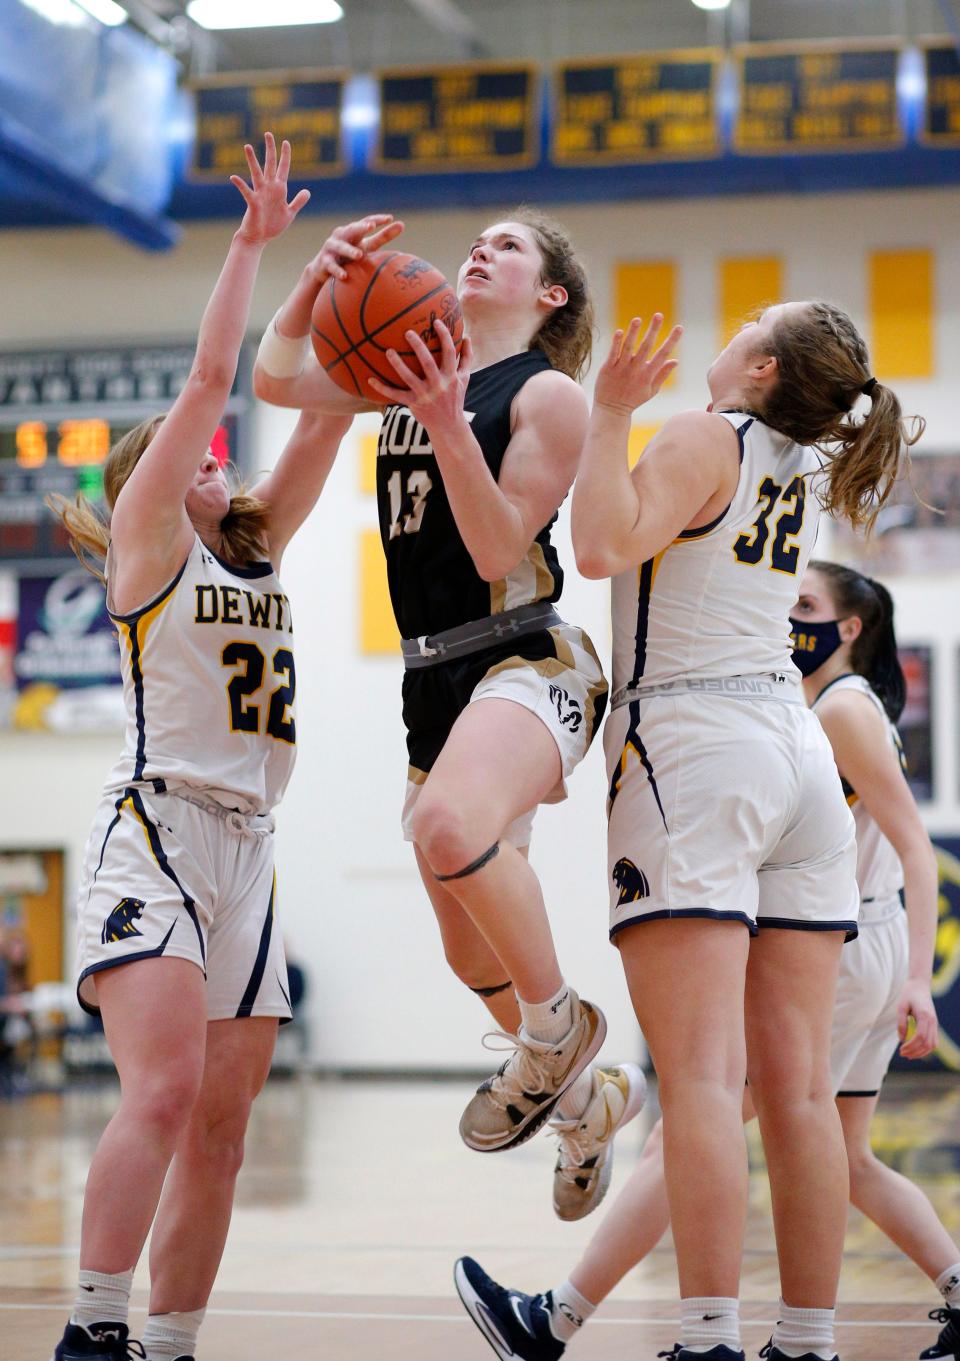 Holt's Claire Groenewoud, center, goes to the basket between DeWitt's Madison Uyl, left, and Morgan Bethard, right, Tuesday, Jan. 18, 2022, in DeWitt, Mich. Holt won 49-48.